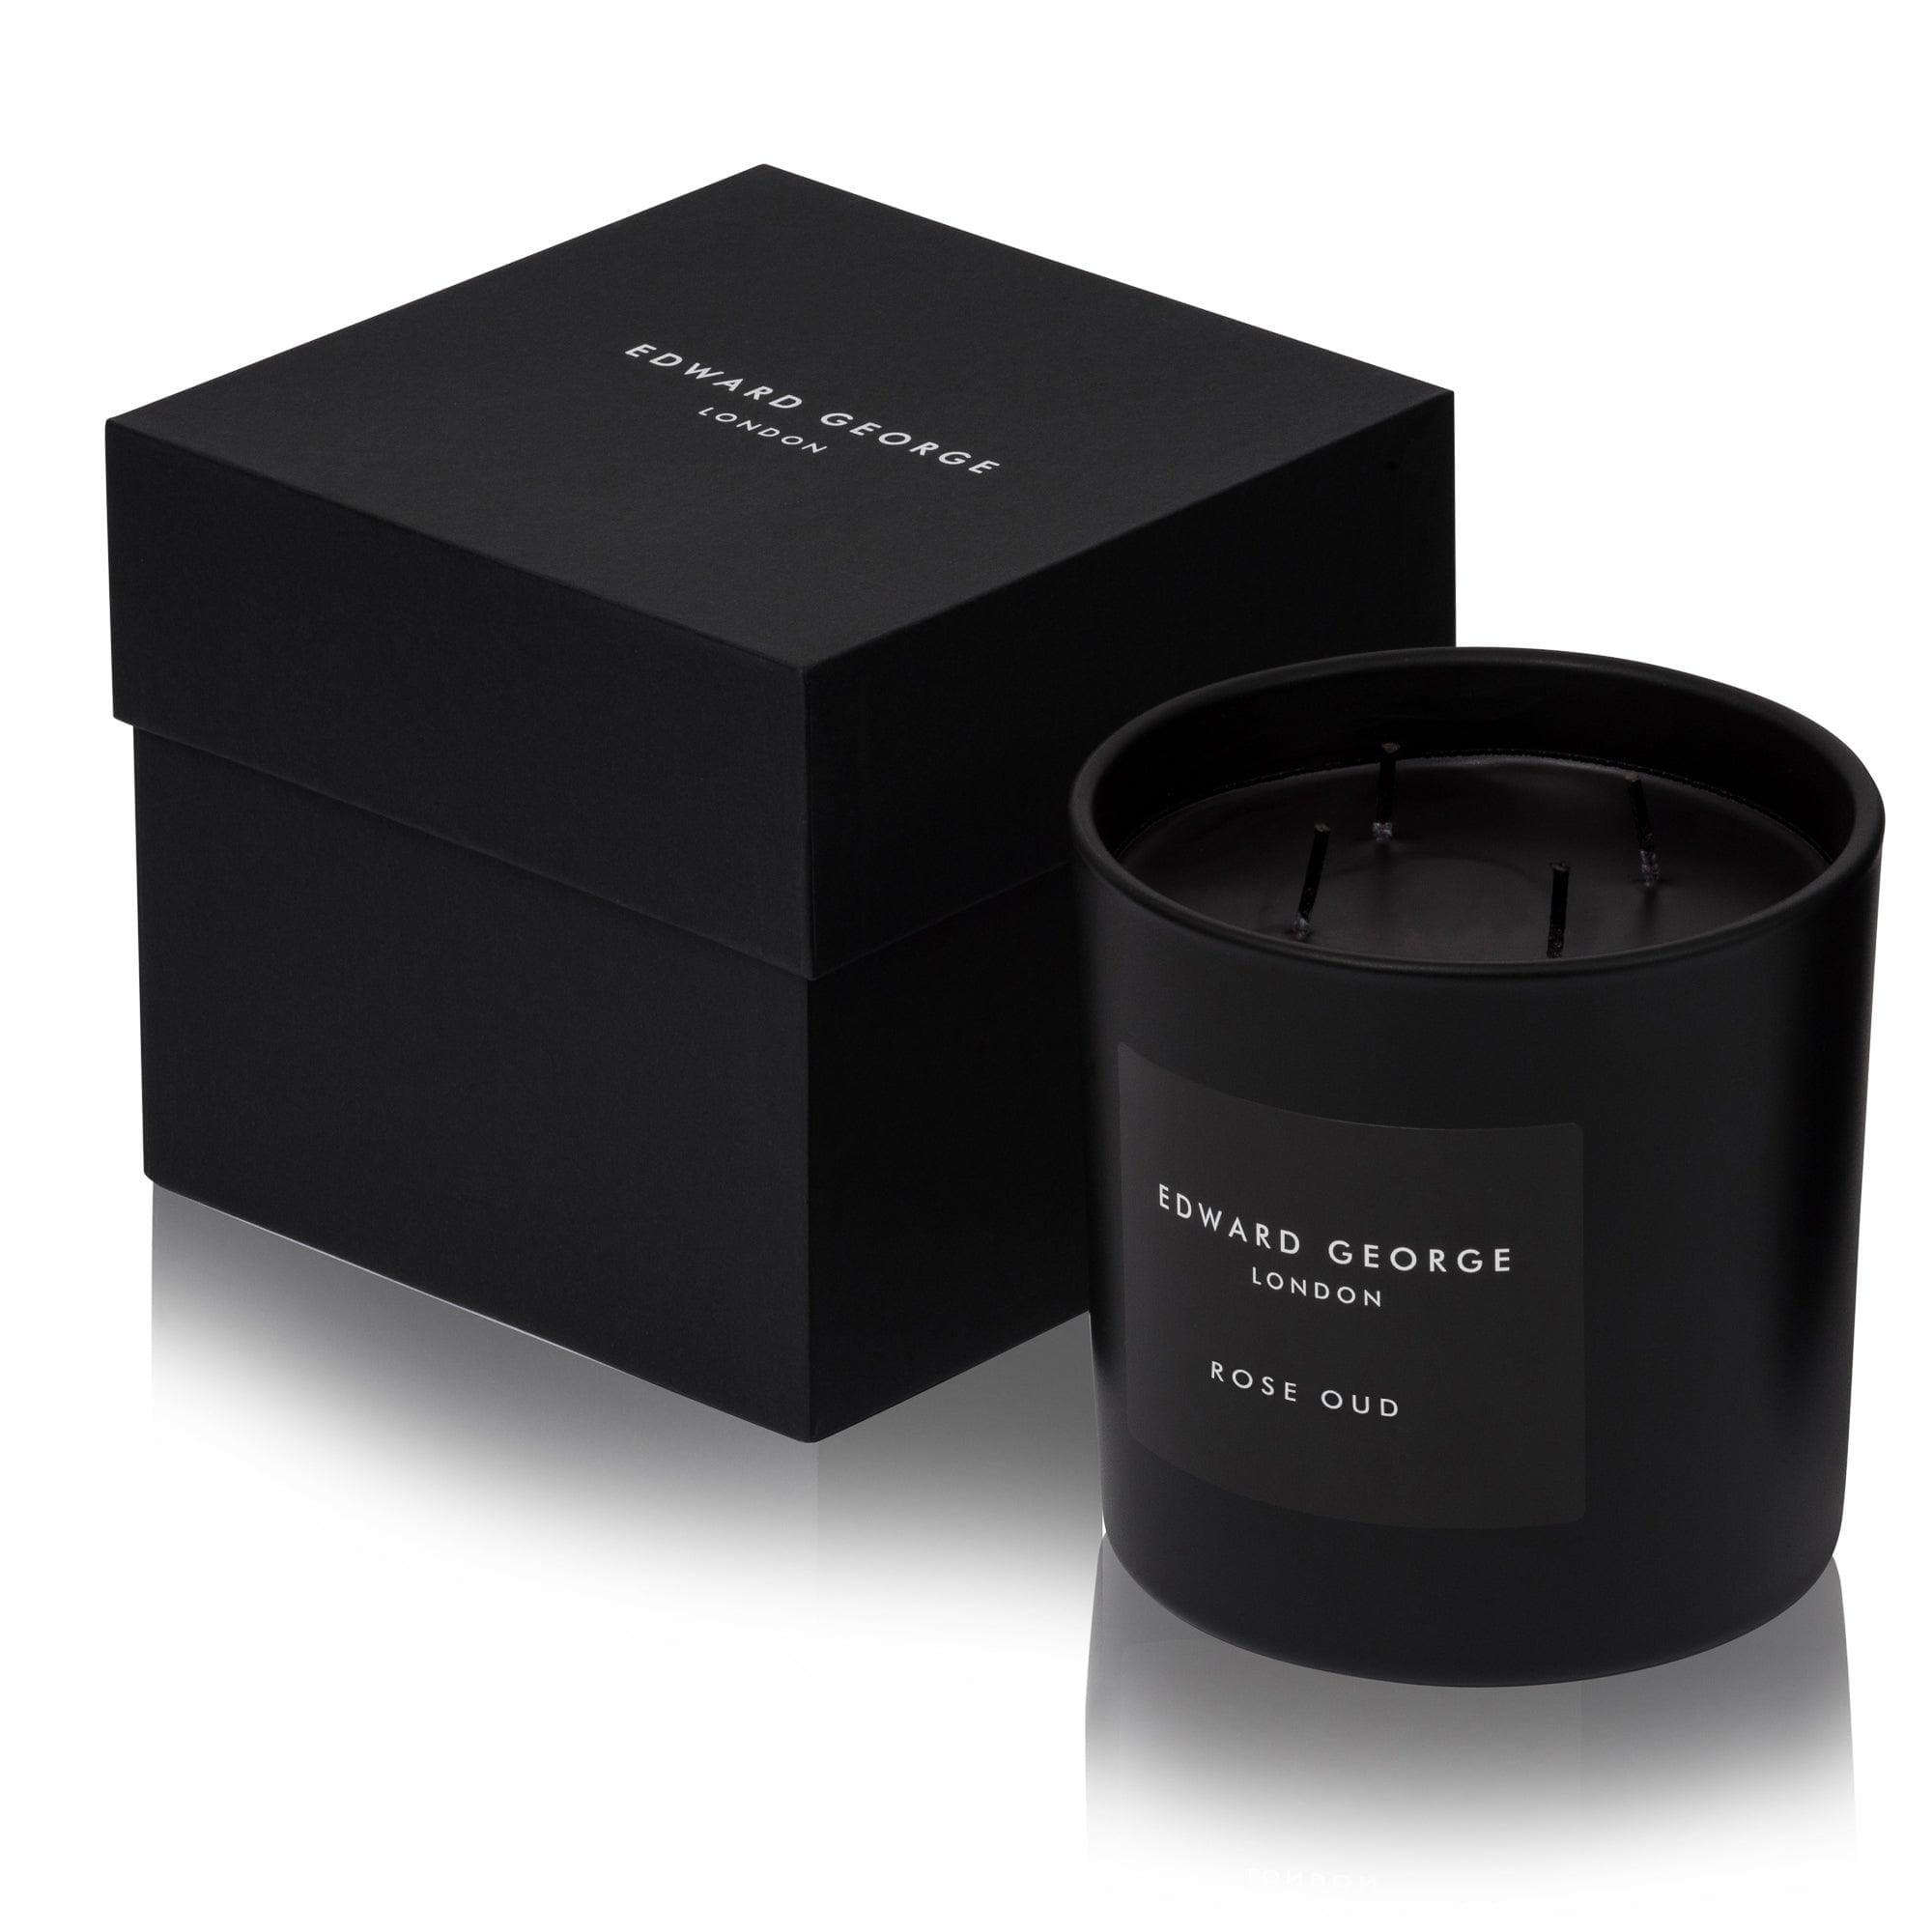 rose oud candles home fragrance decor room living room bedroom bathroom hallway kitchen study dinning edward george london luxury gift ritual scent set lid zinc alloy black wax mineral best black wax scented candle women men large